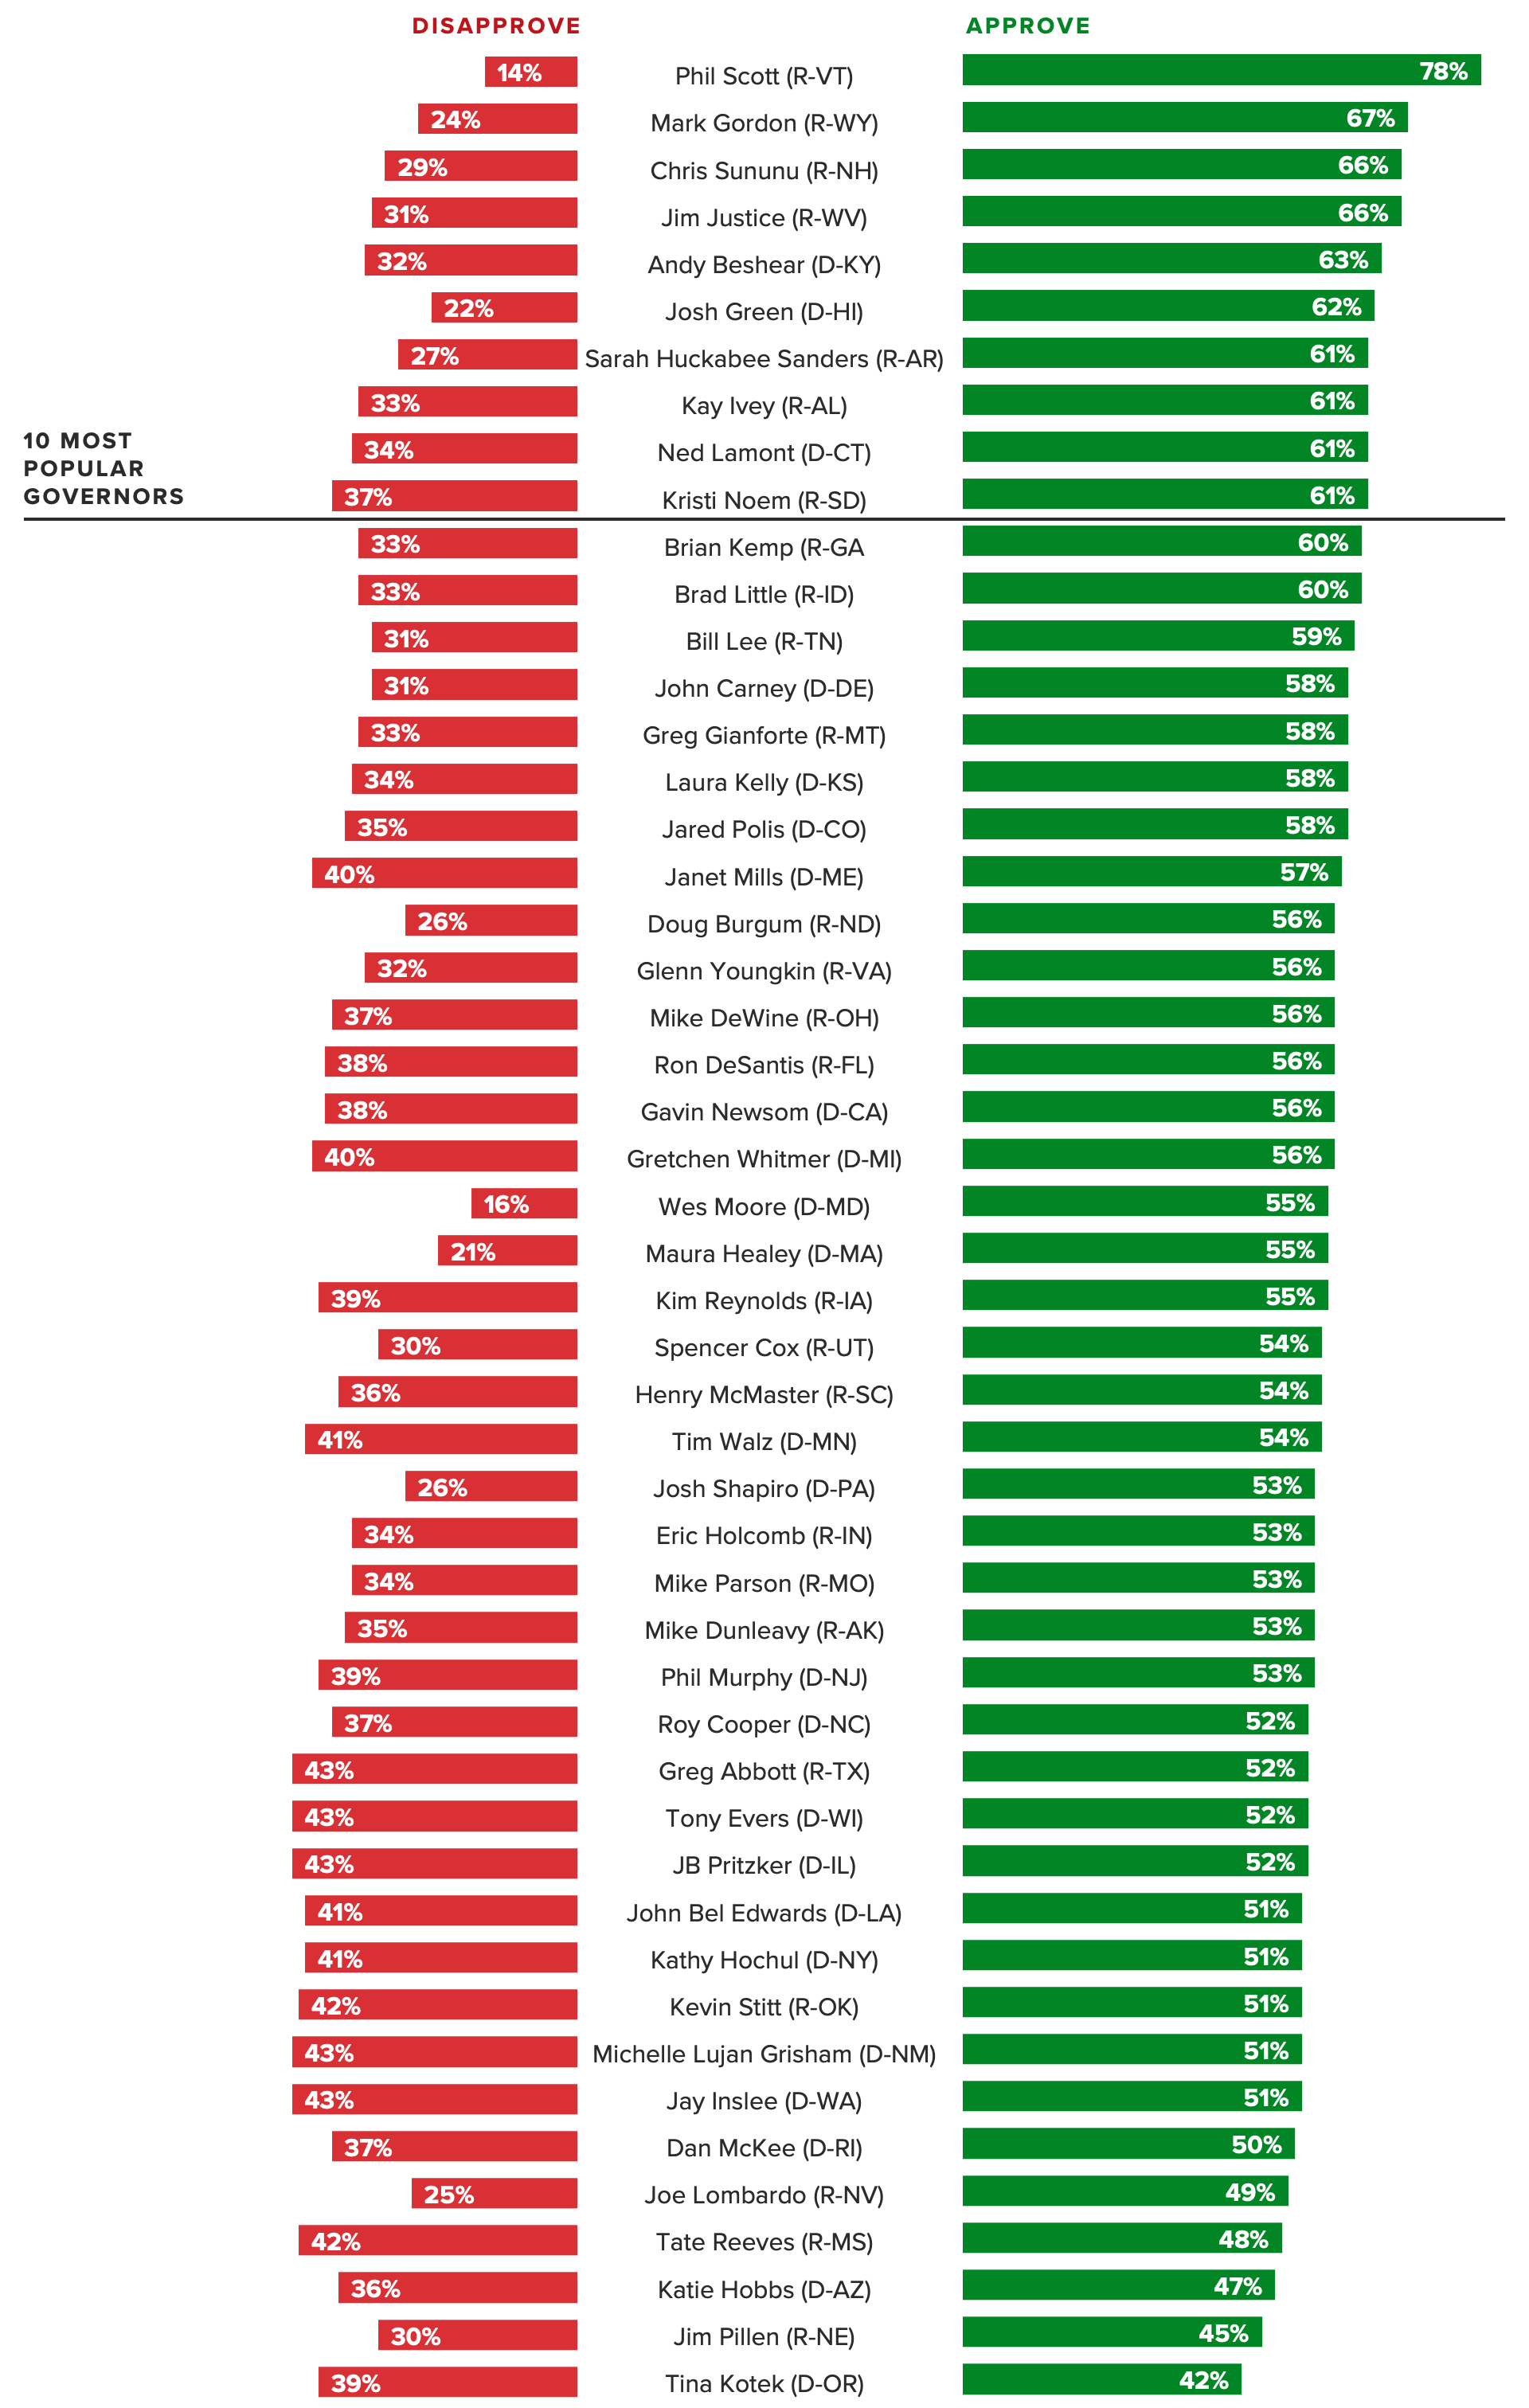 Bar chart of the U.S. governors with the highest approval ratings.